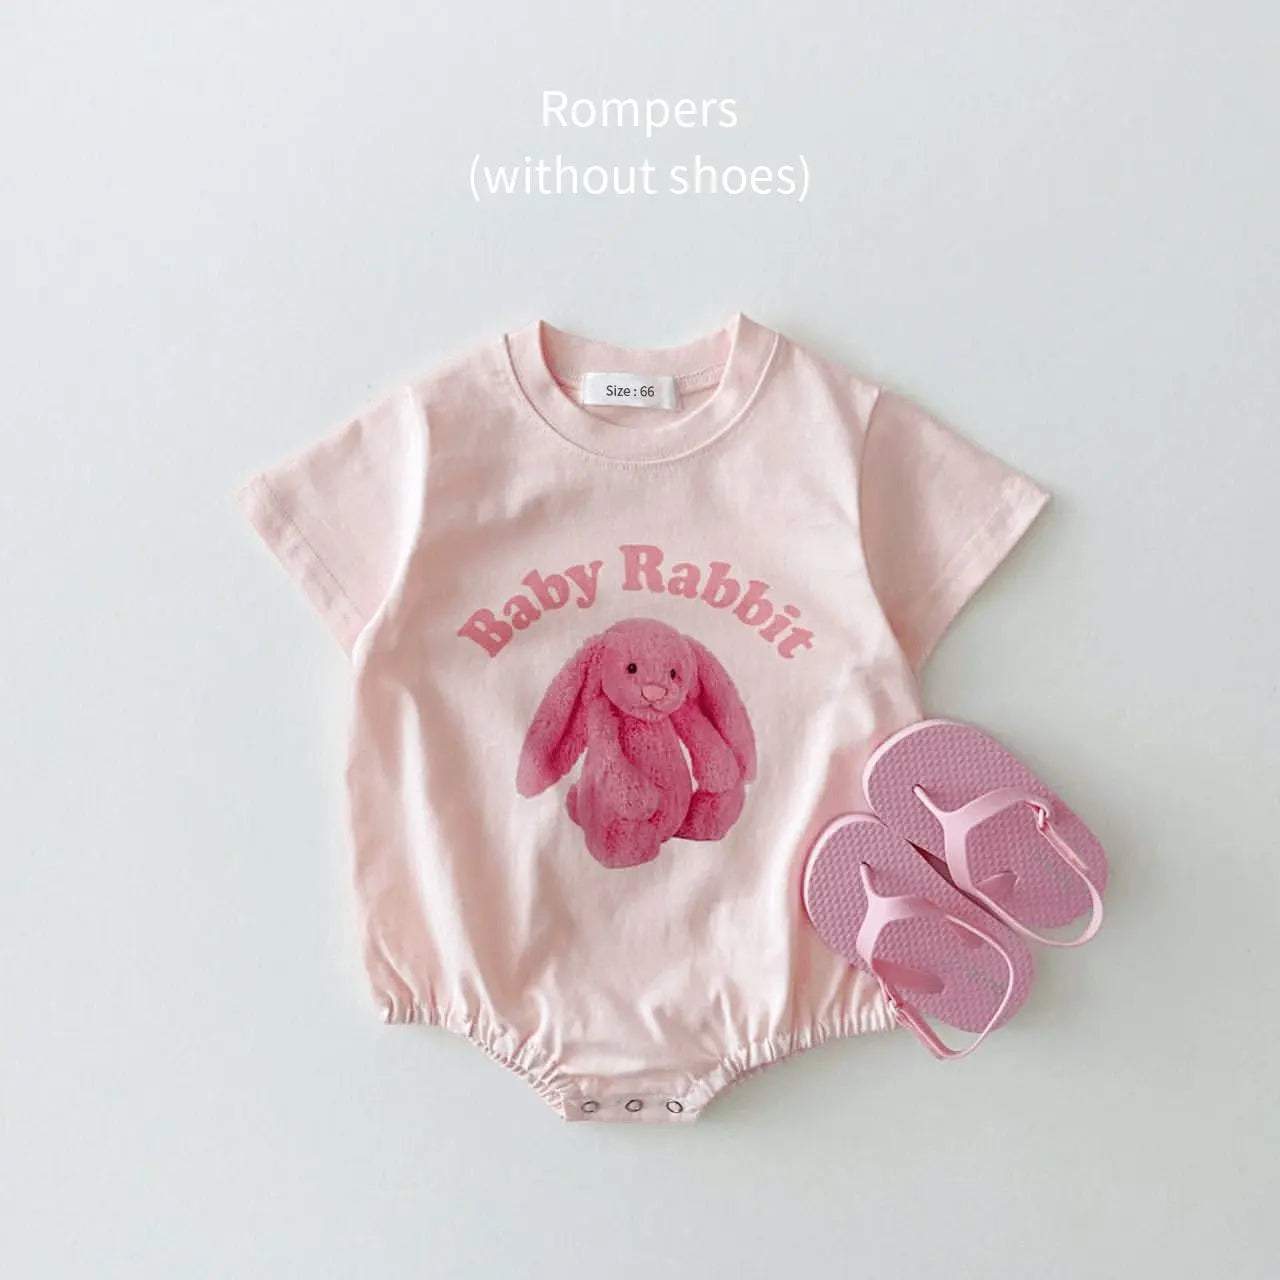 2023 Country Bear Summer Baby Boy Romper Outfit Organic Cotton Bear Print T shirts Romper 3month Infant Clothing Baby Girl Bodysuit - Image #7